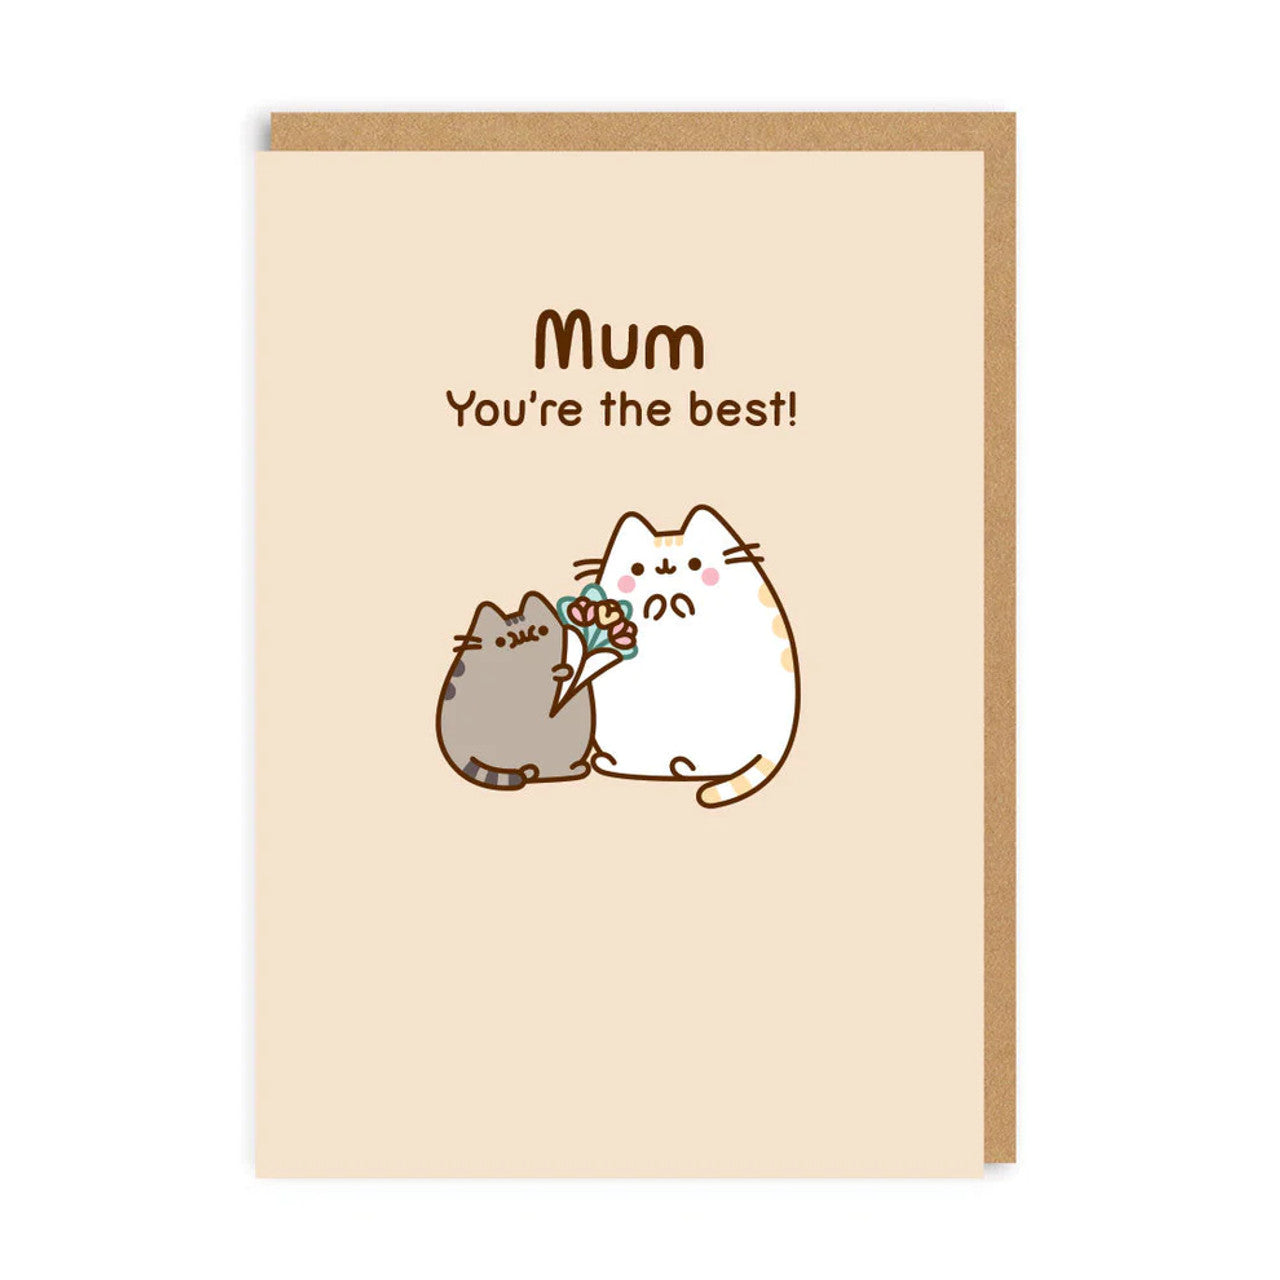 Mum Birthday Card text reads "Mum, You're the best!"